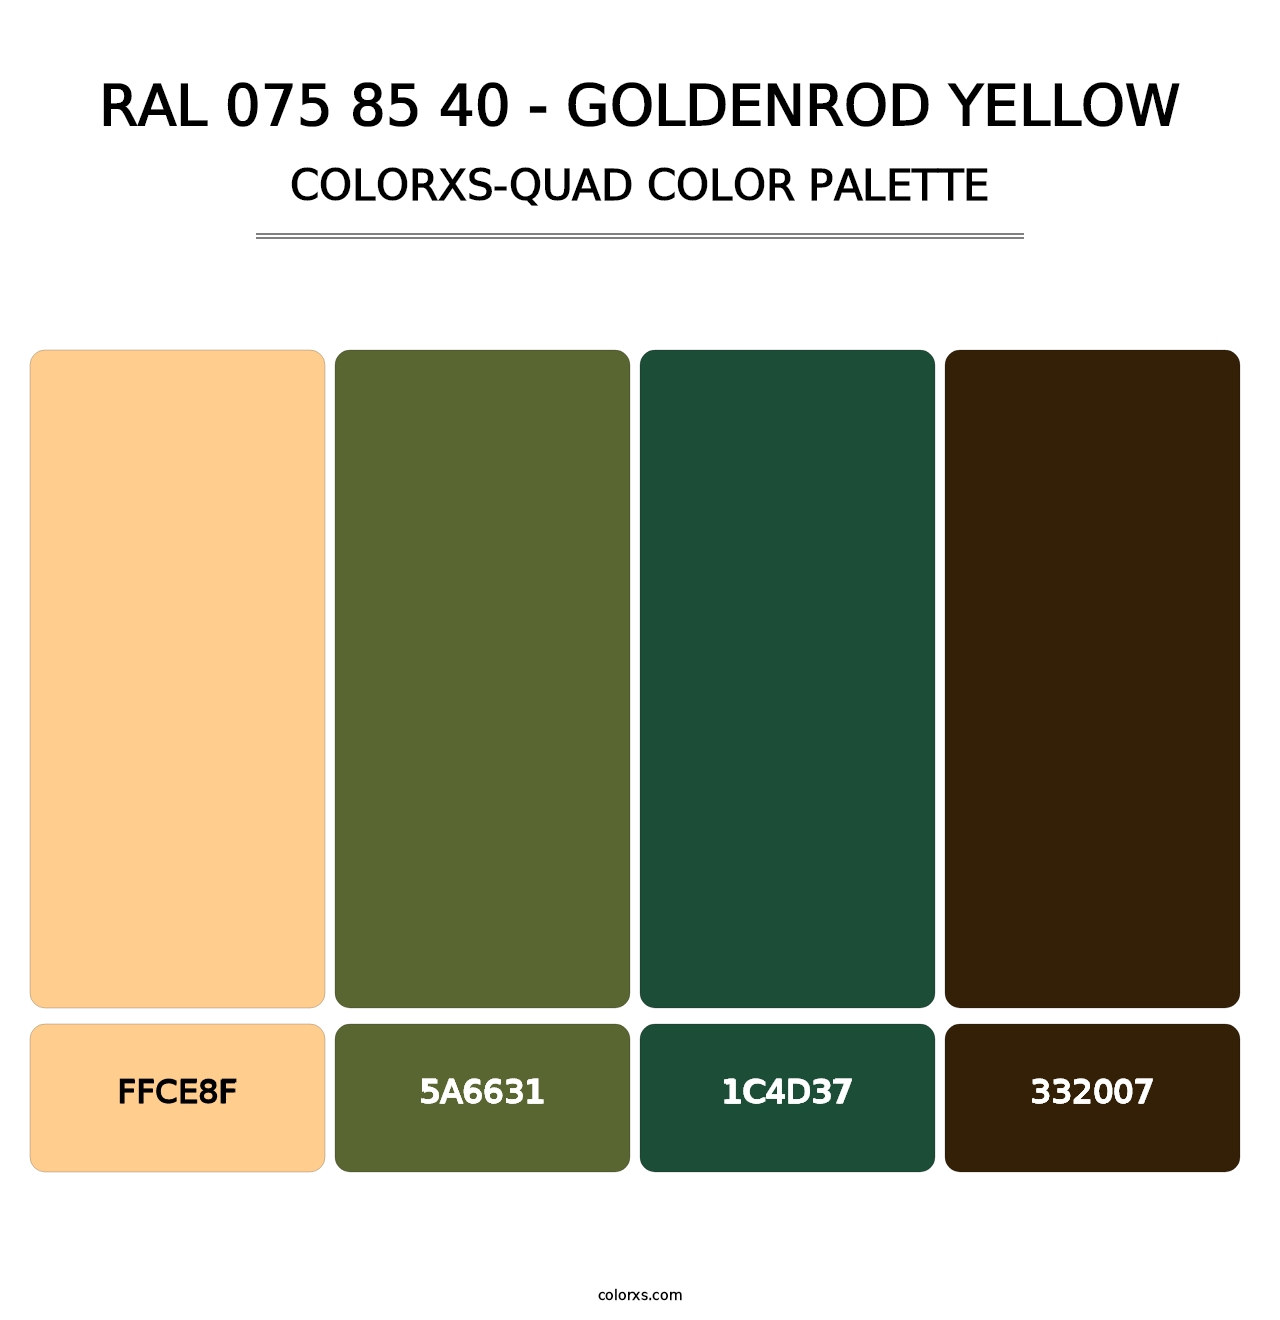 RAL 075 85 40 - Goldenrod Yellow - Colorxs Quad Palette